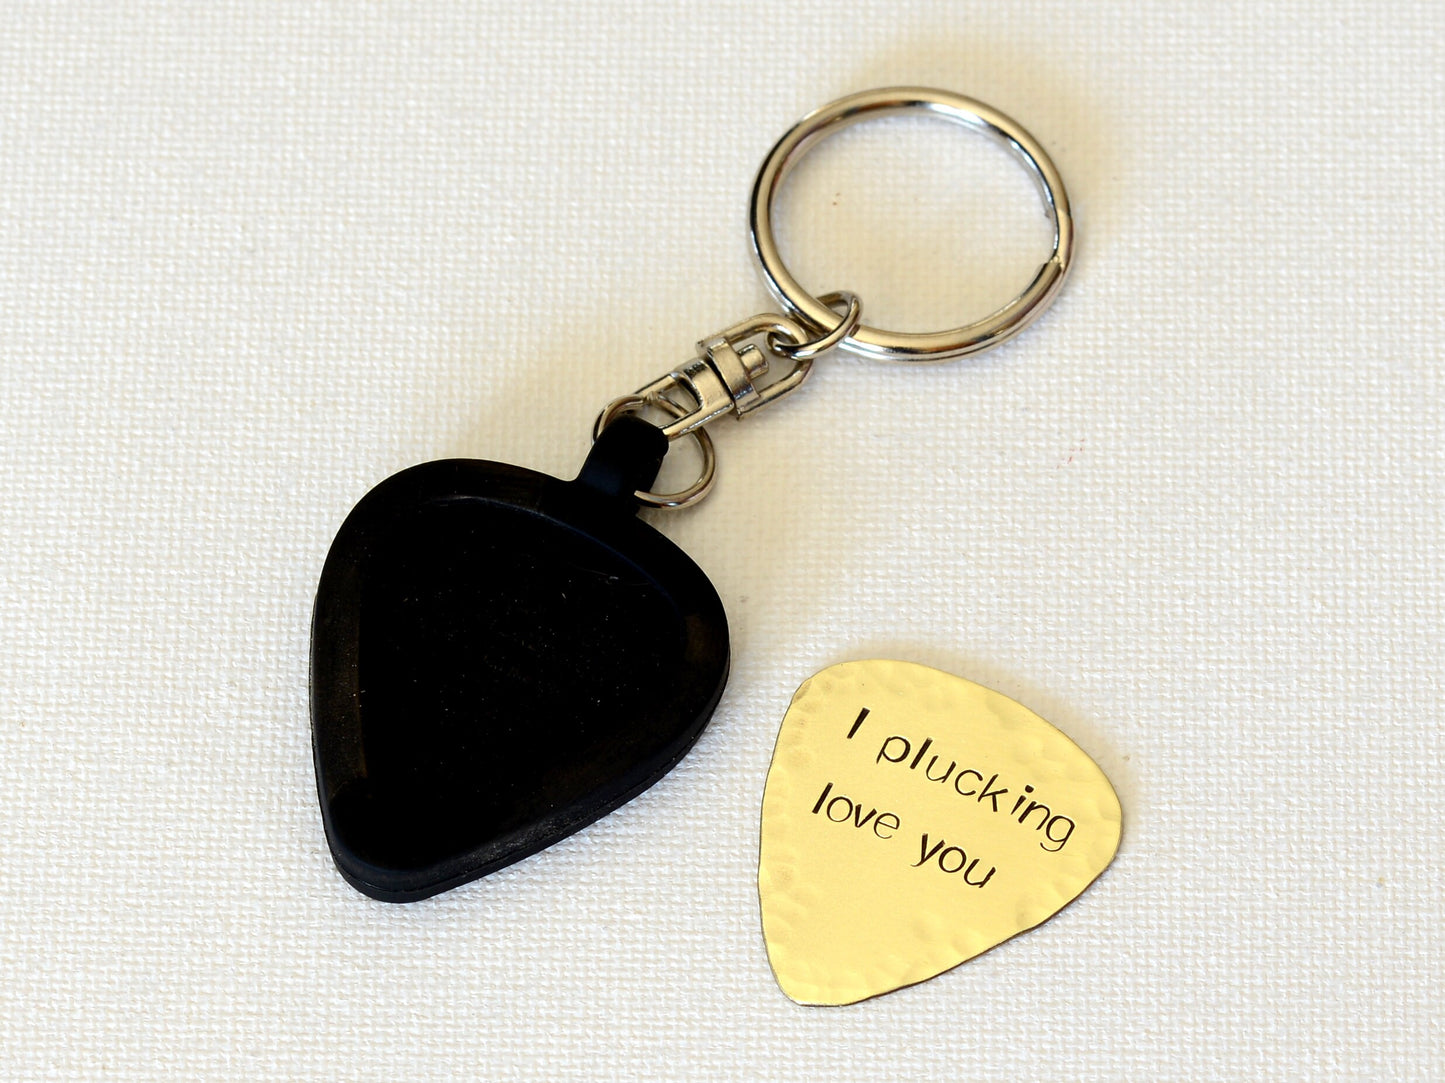 Brass guitar pick keychain with rubber holder